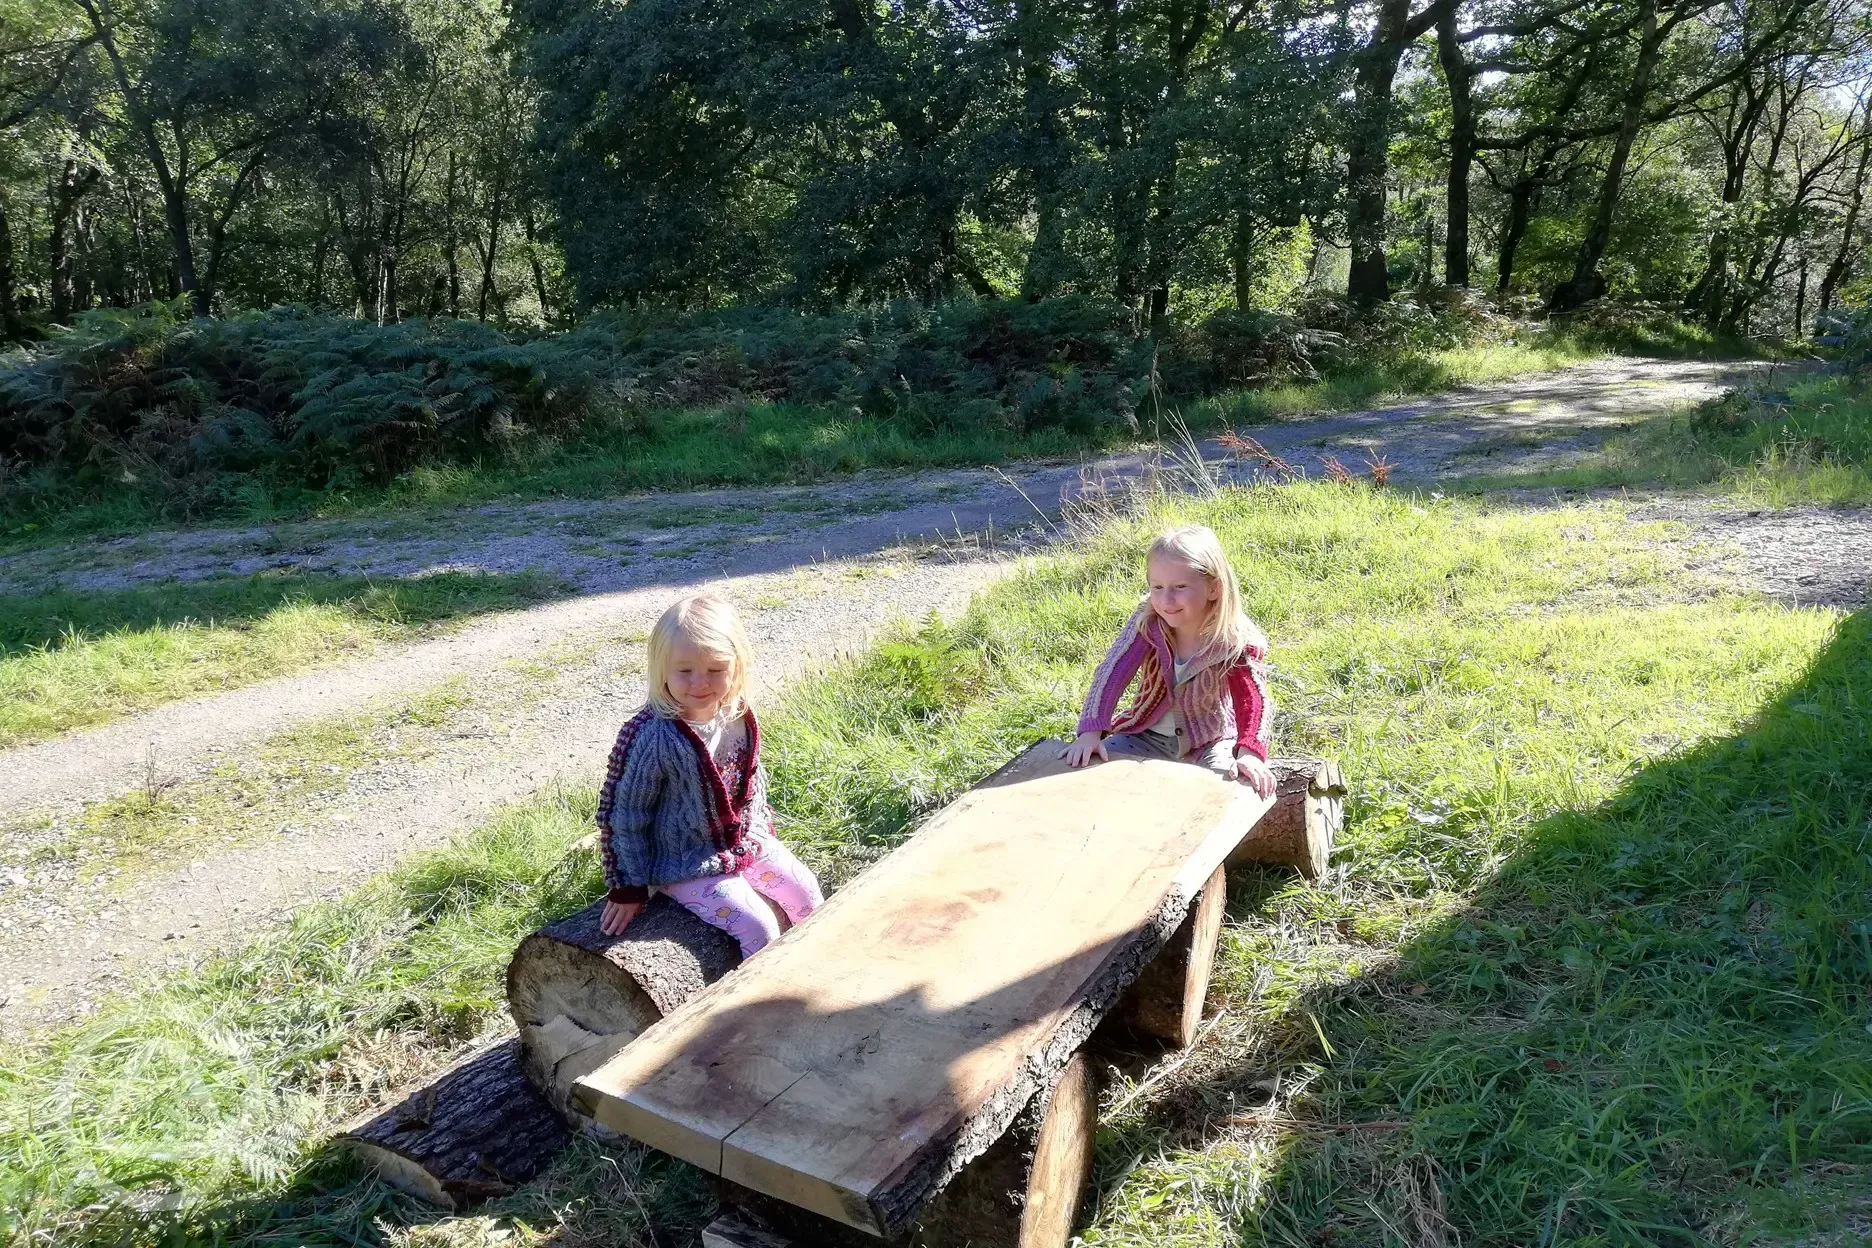 the girls liked the rustic furniture